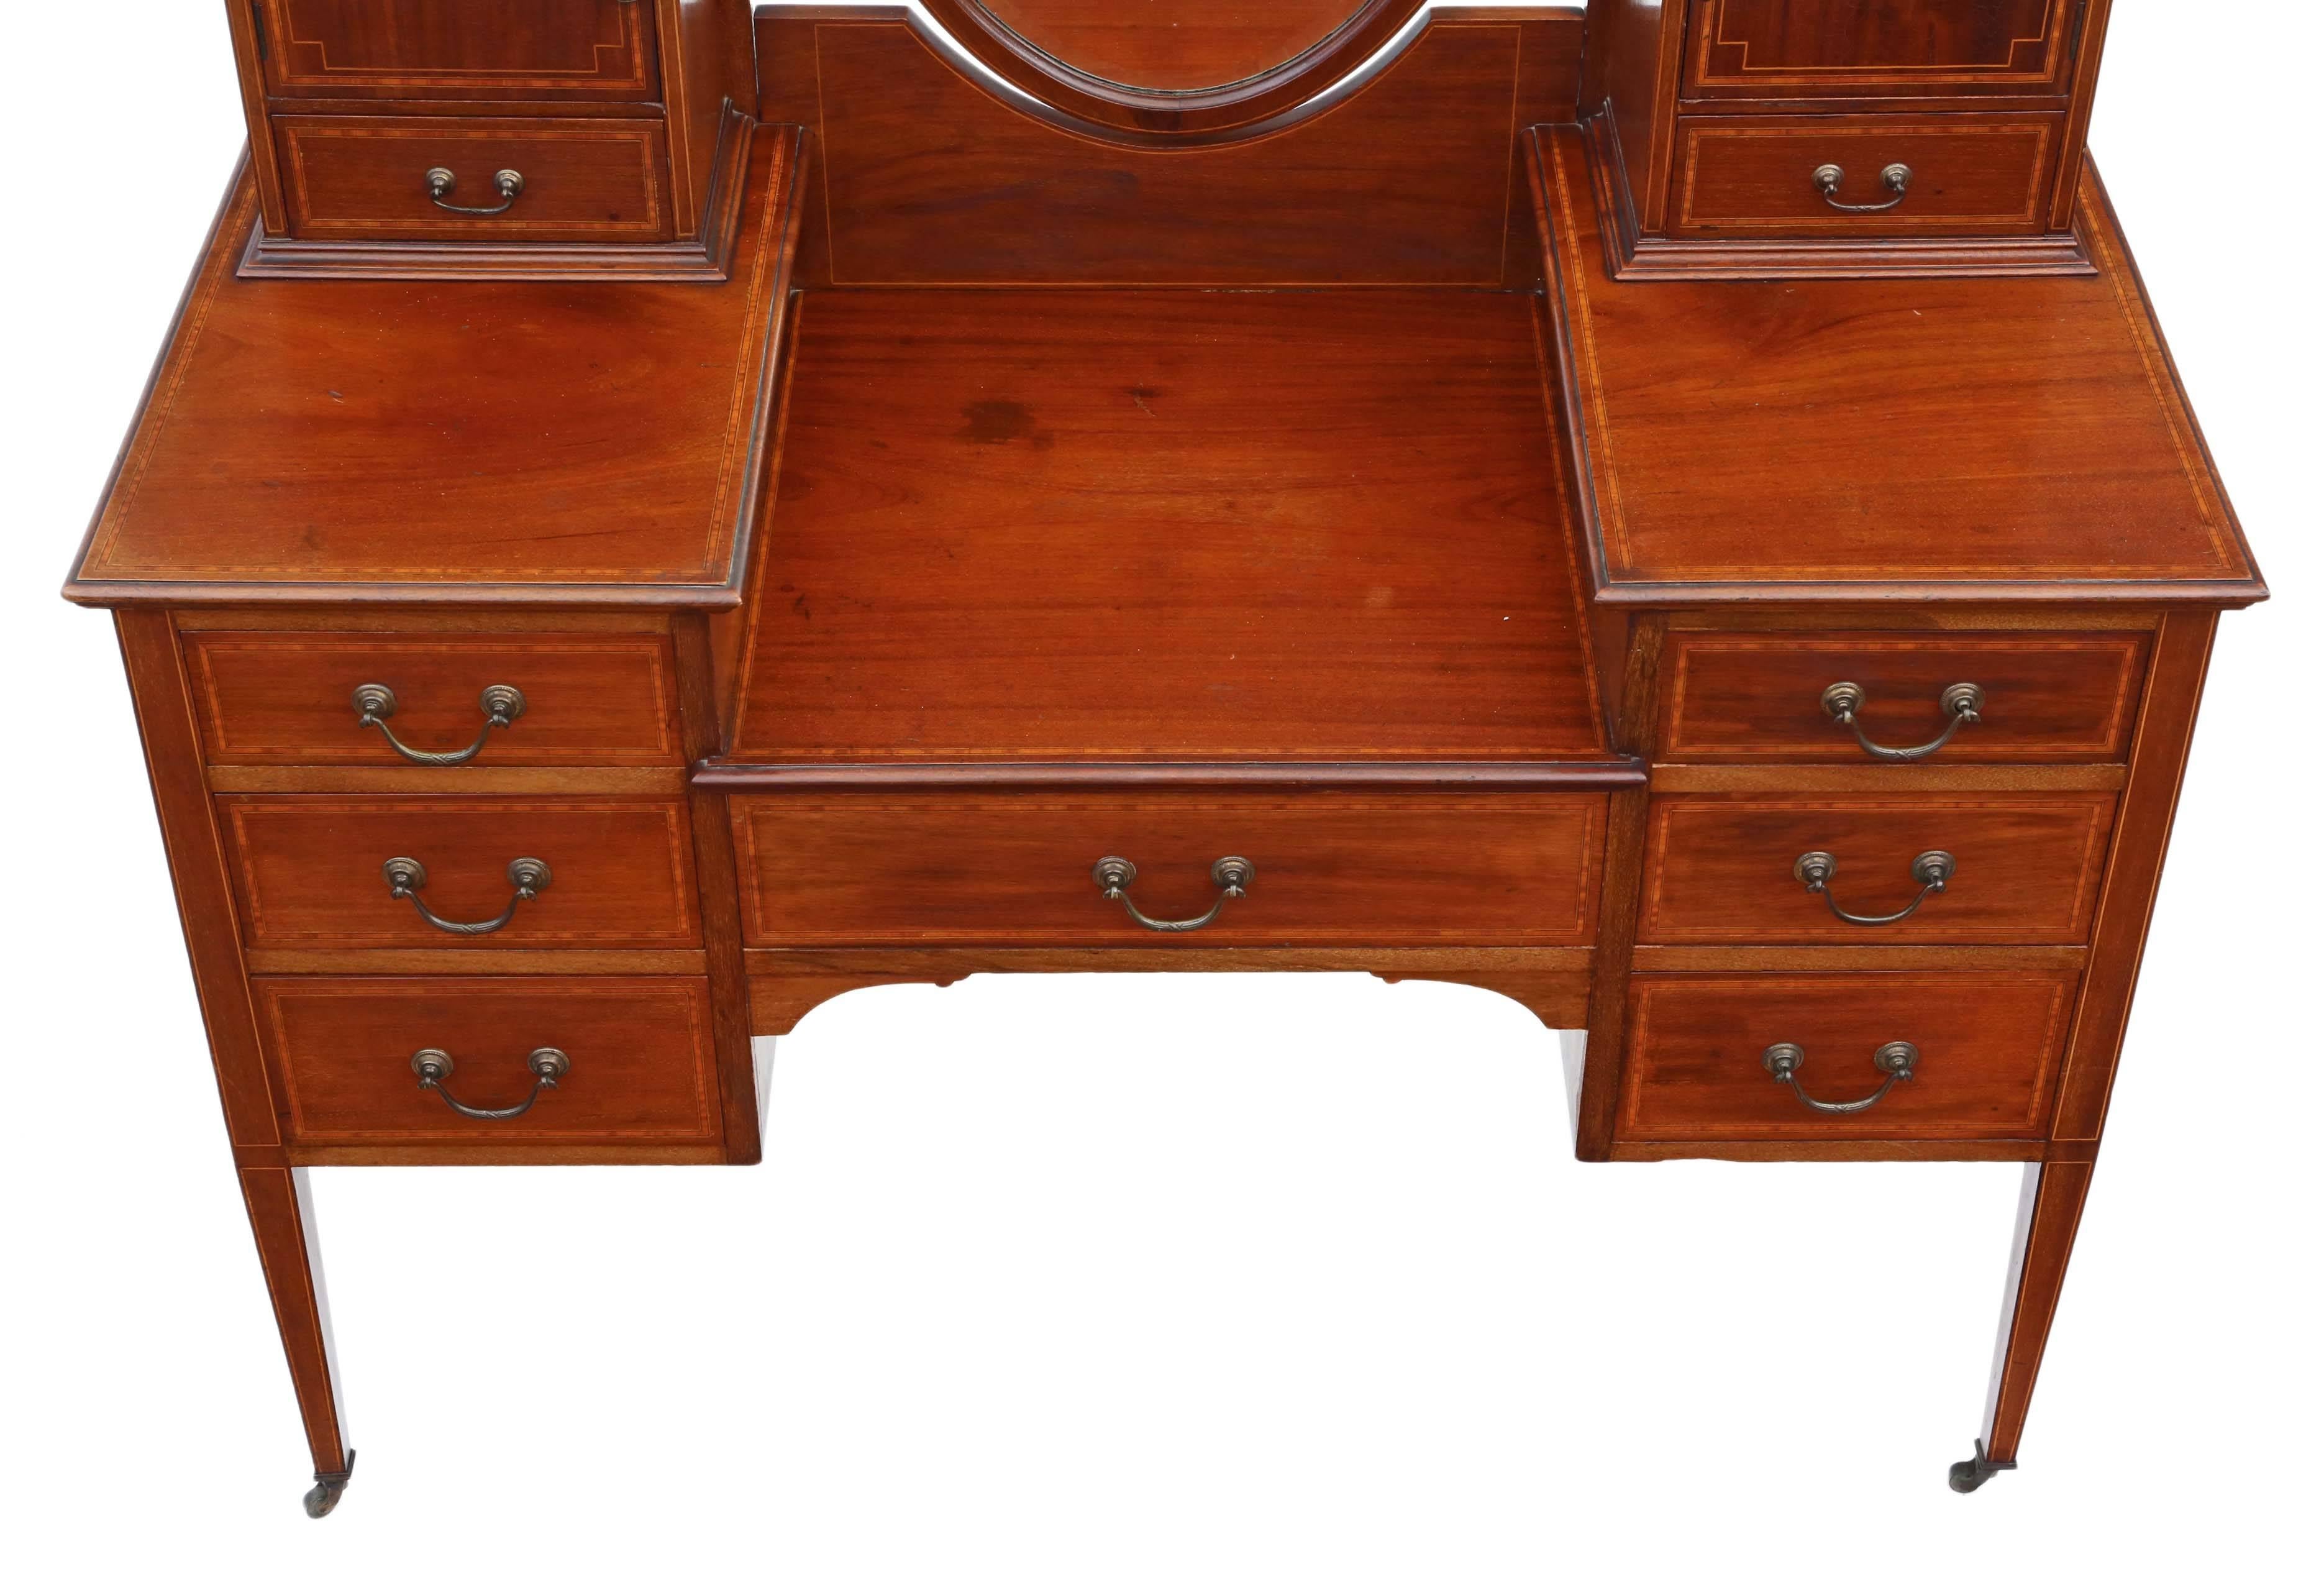 Antique quality large Edwardian inlaid mahogany dressing table.

This is a lovely quality item, that is full of age, charm and character.

Solid with no loose joints and no woodworm.

The drawers slide freely. Period brass castors (with some wear as